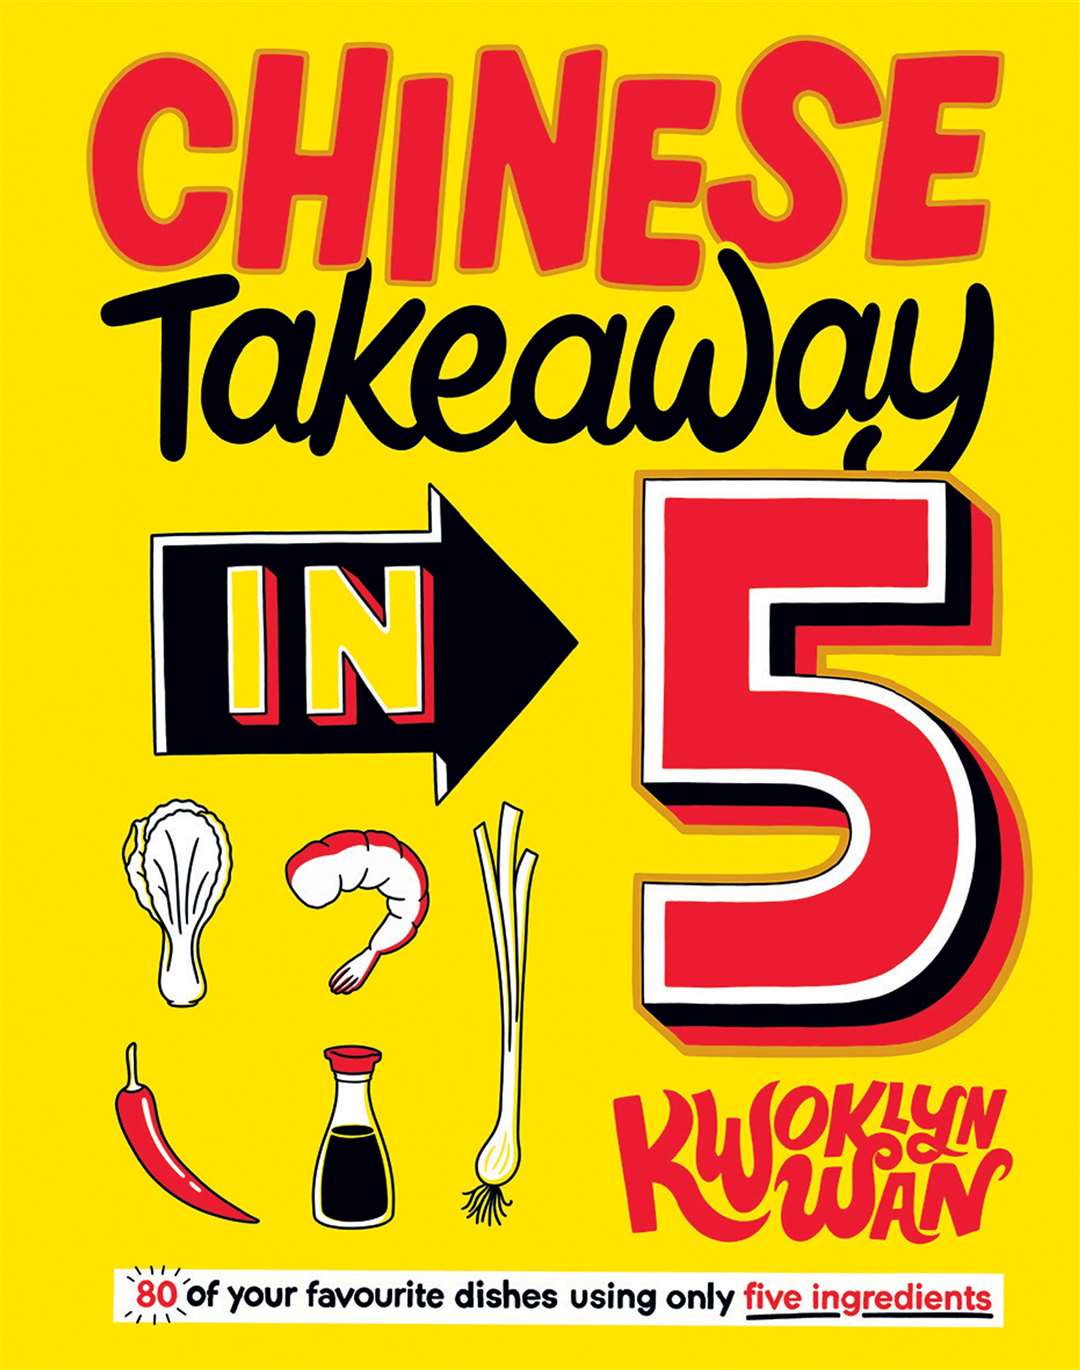 Chinese Takeaway in 5 by Kwoklyn Wan is published by Quadrille, priced £15. Picture: PA Photo/Sam Folan